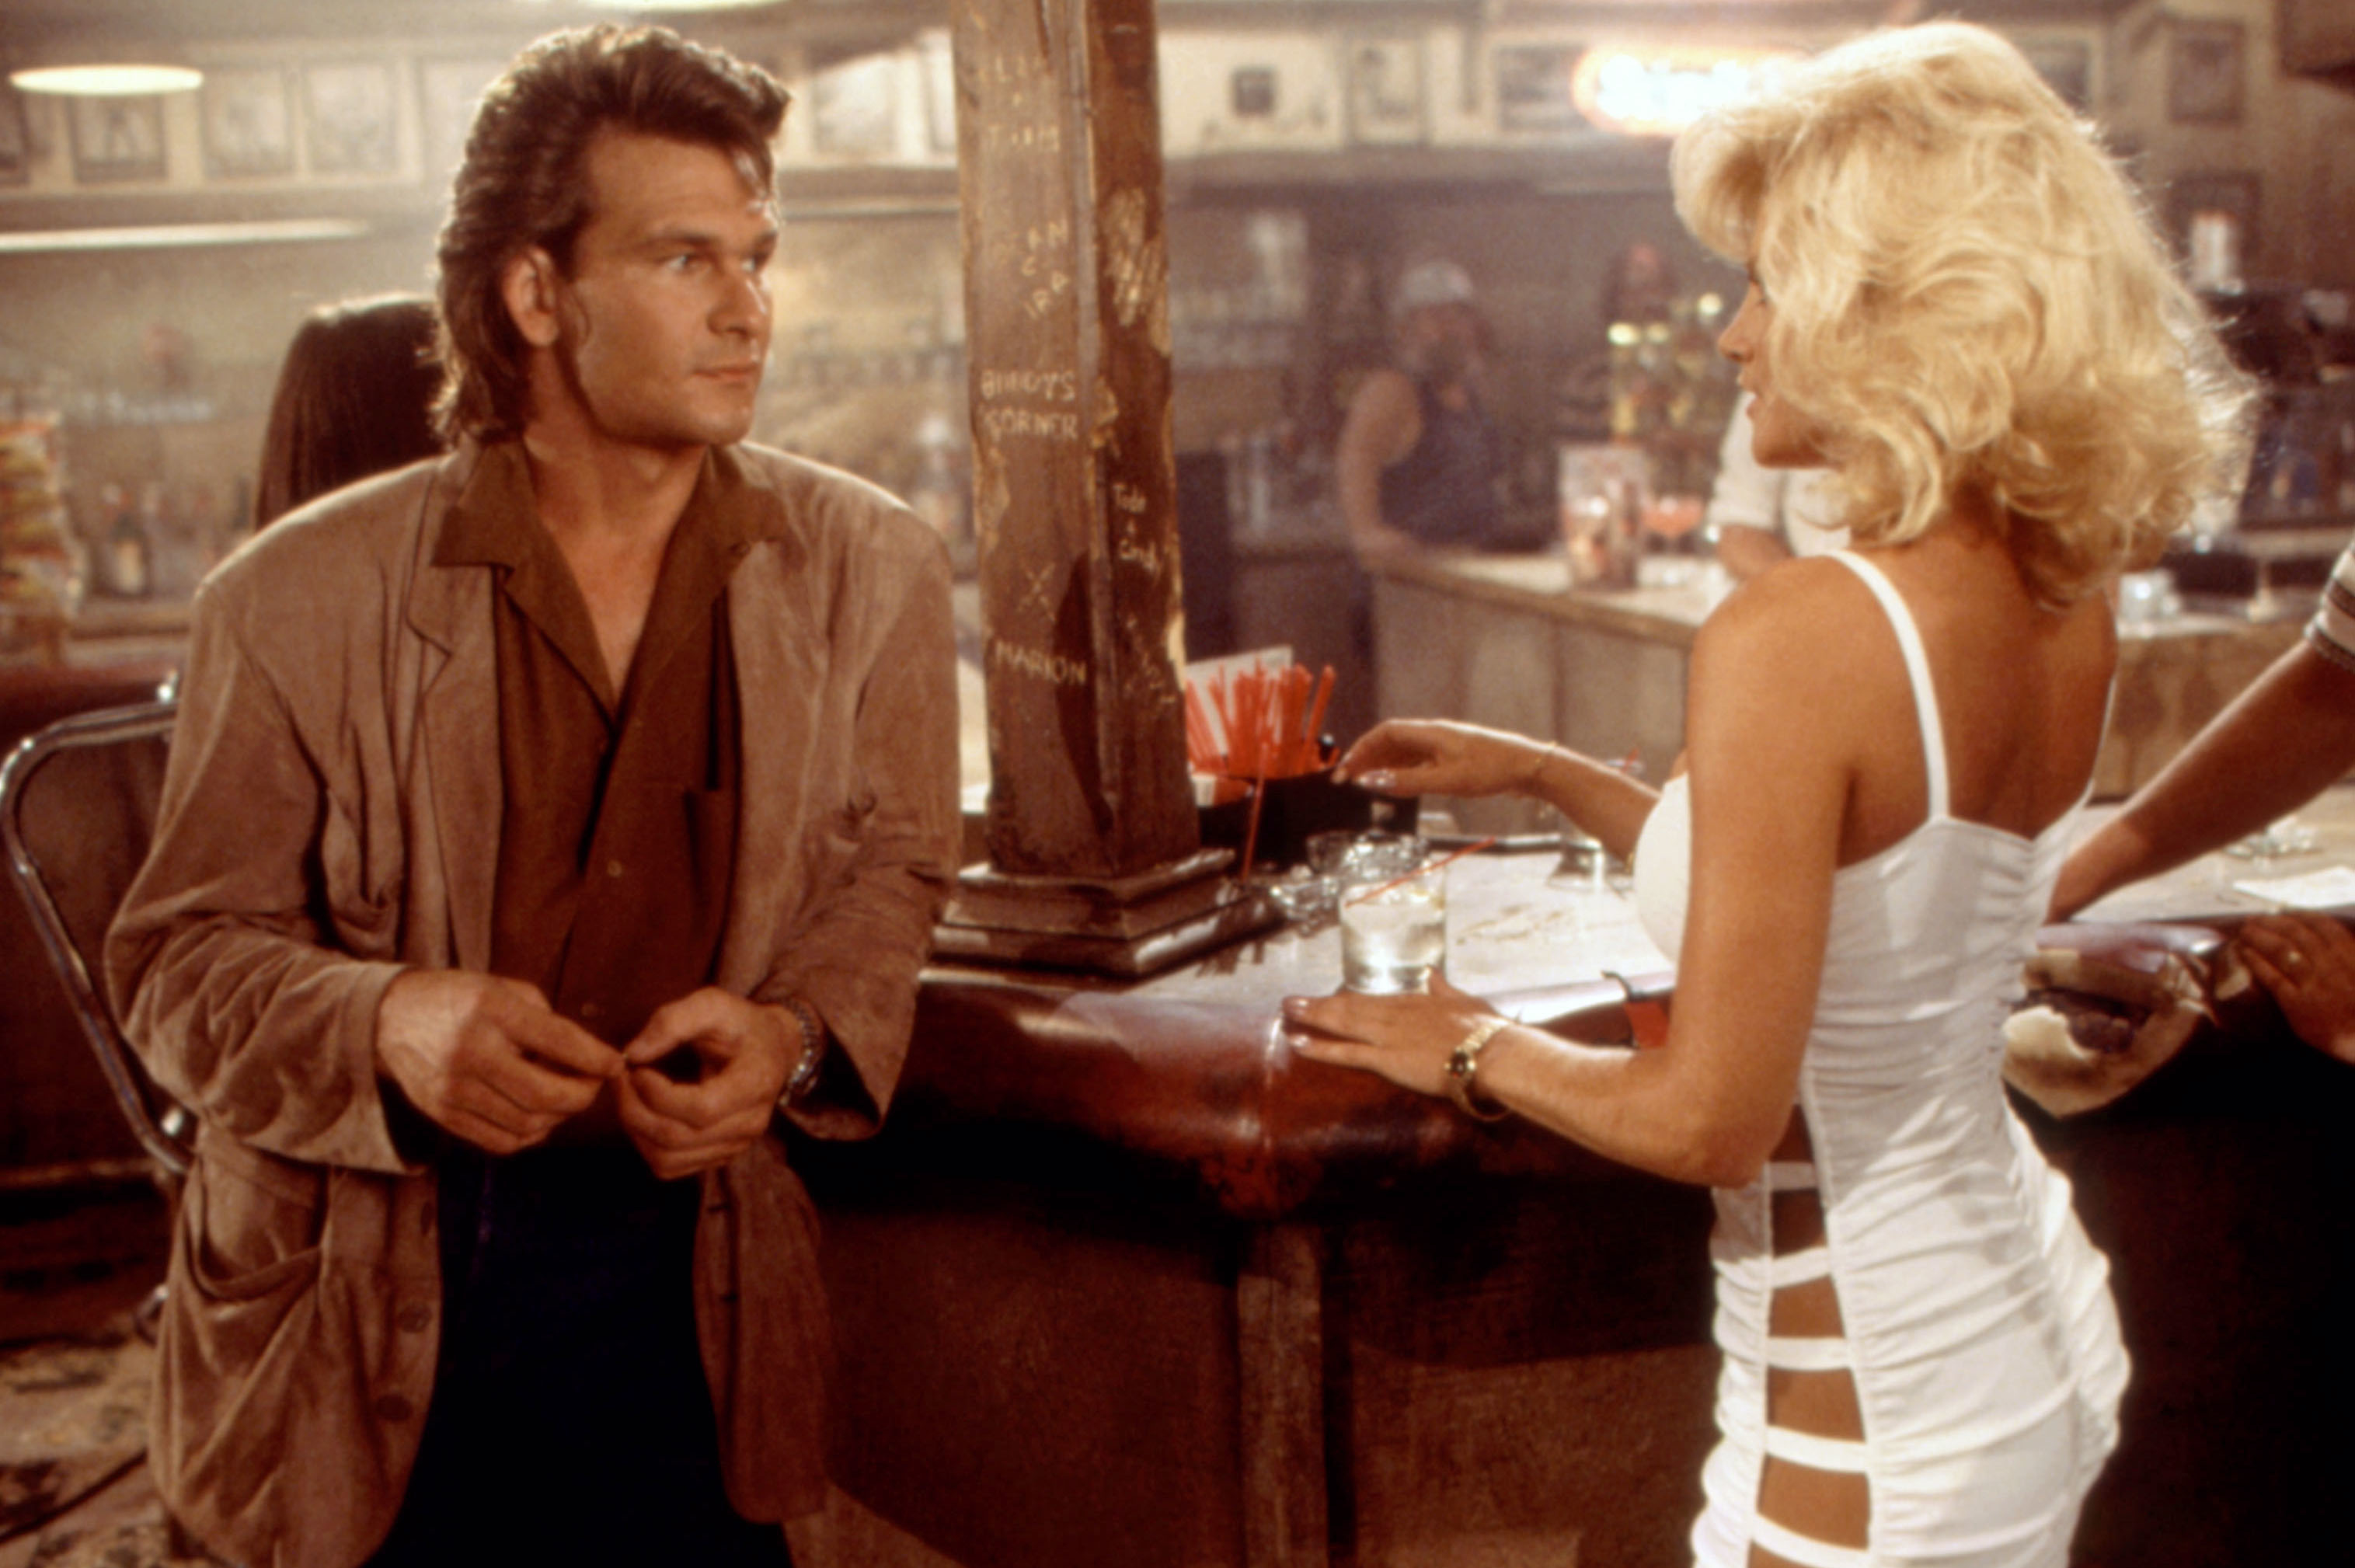 Patrick Swayze, in a suede jacket, speaks to a blonde woman in a skimpy white dress, at a bar